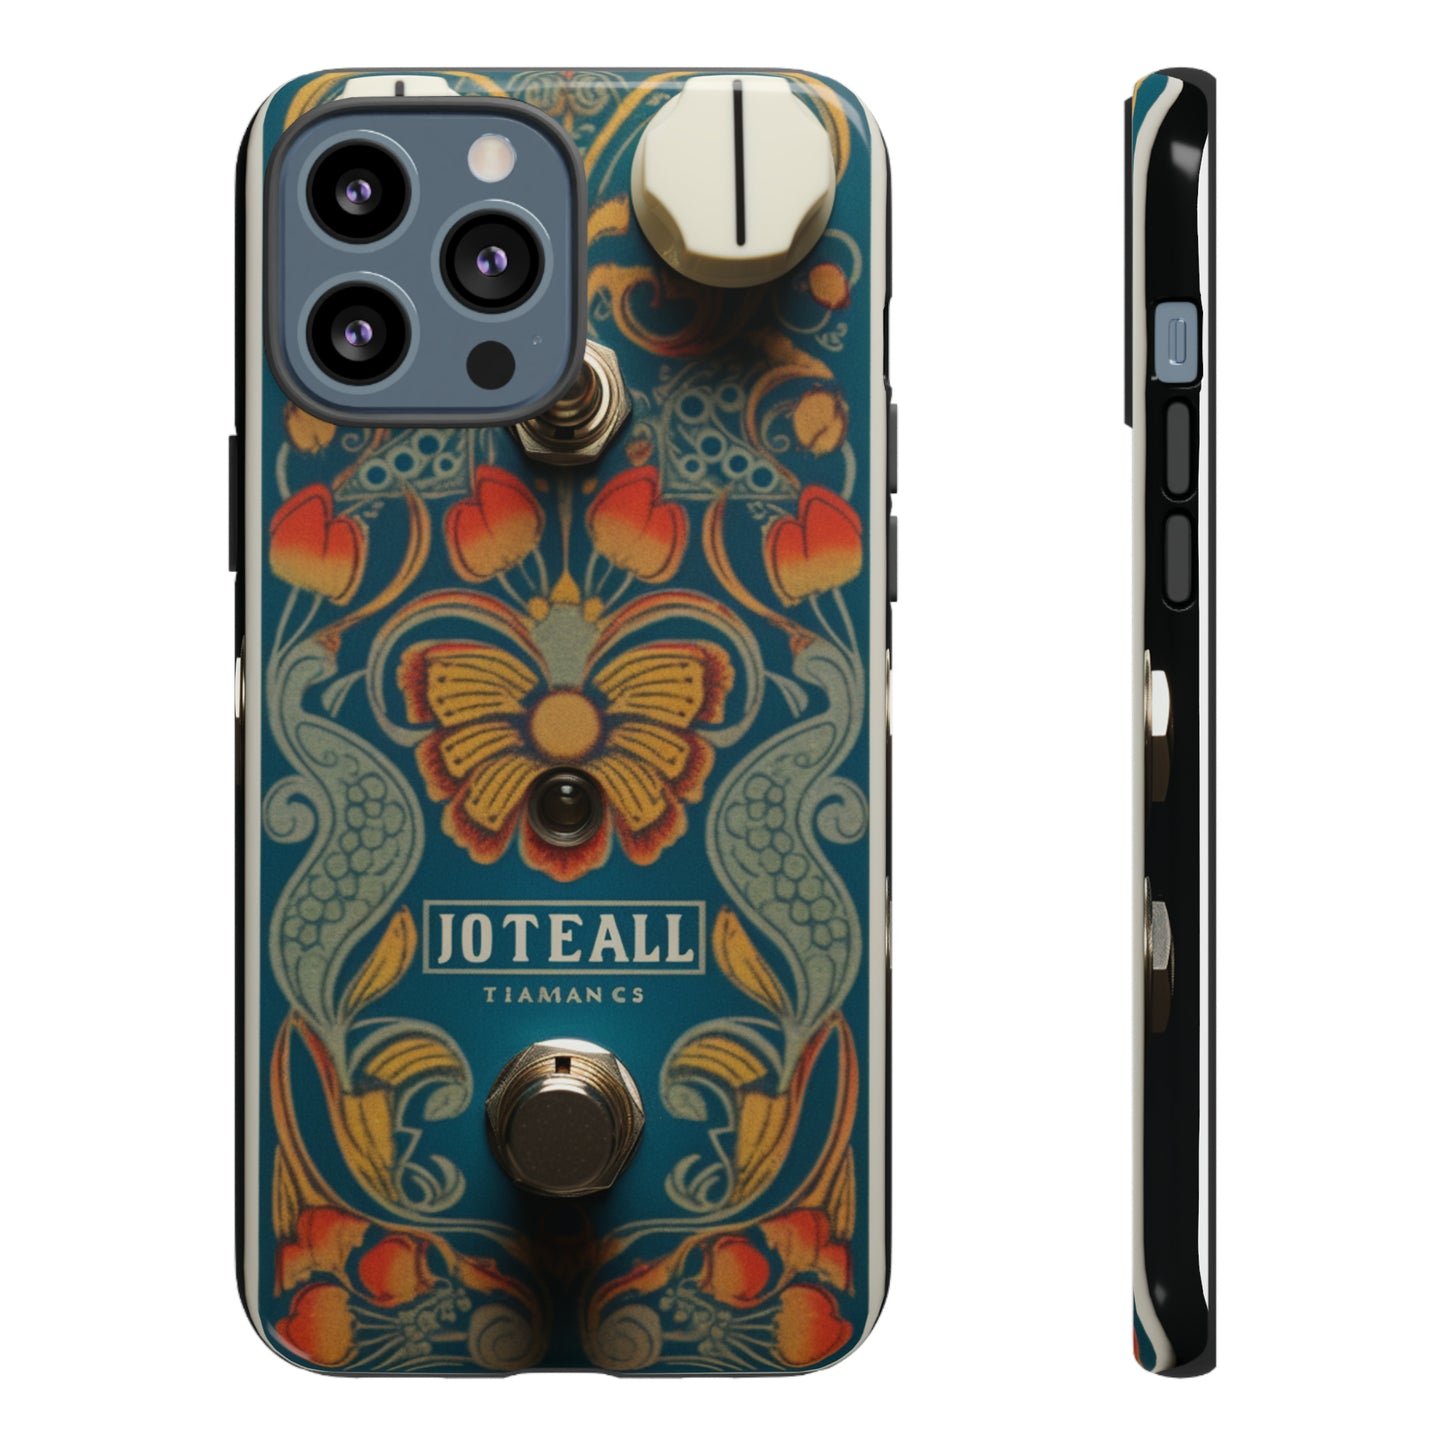 Rock 'n' Roll Guitar Pedal: Tough Phone Case | Iconic Music Style for iPhone, Samsung Galaxy, and Google Pixel